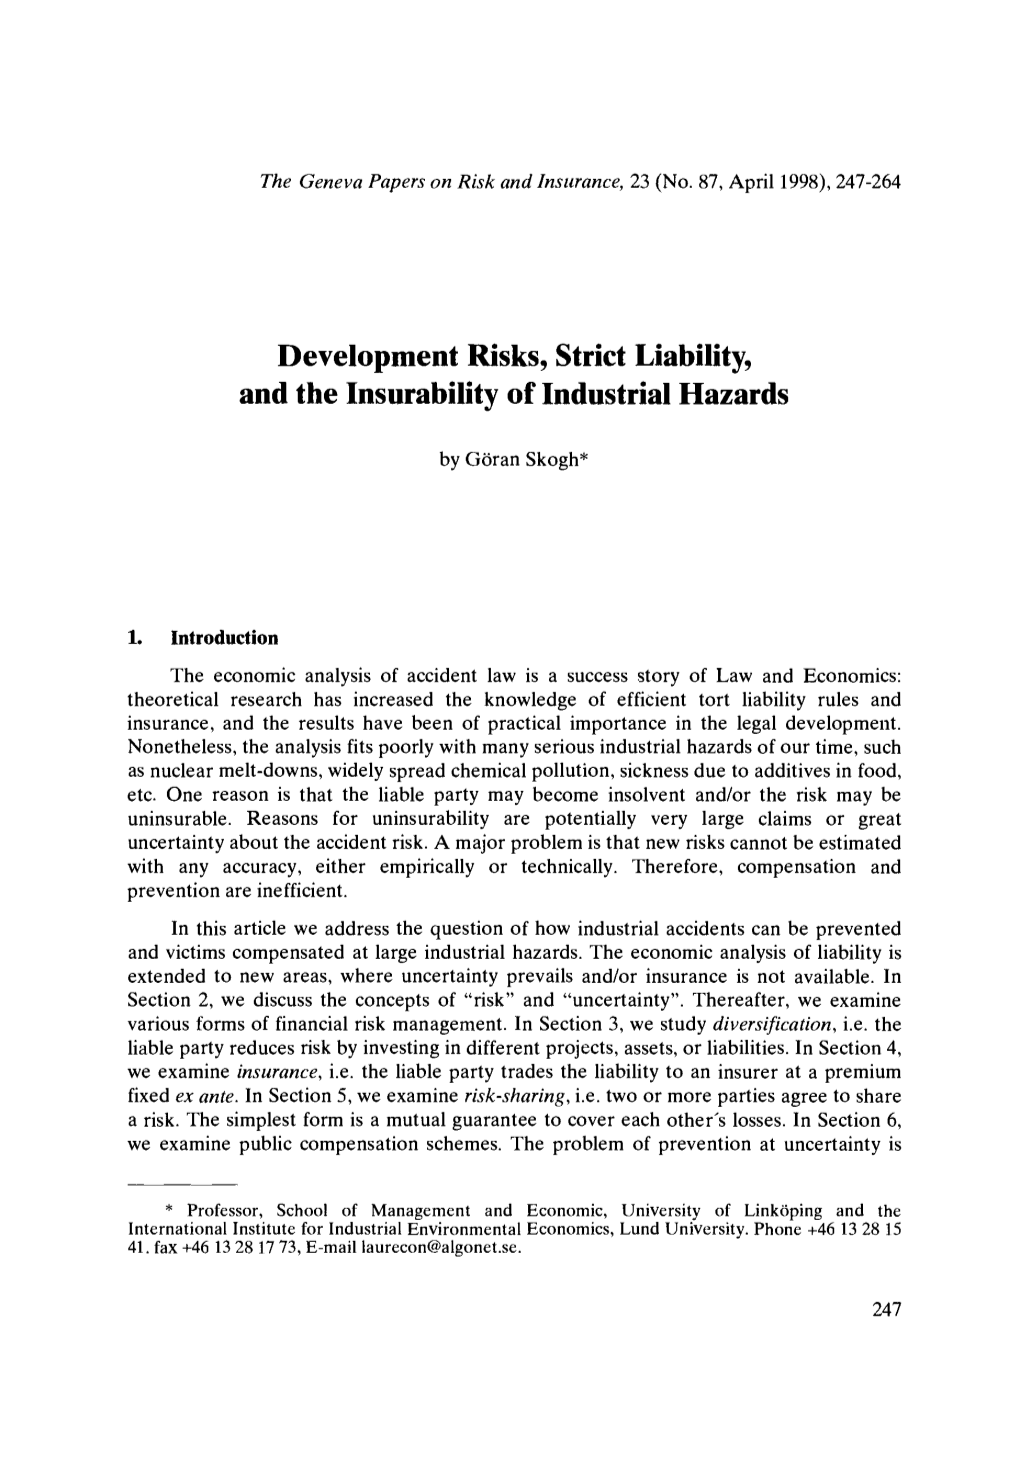 Development Risks, Strict Liability, and the Insurability of Industrial Hazards